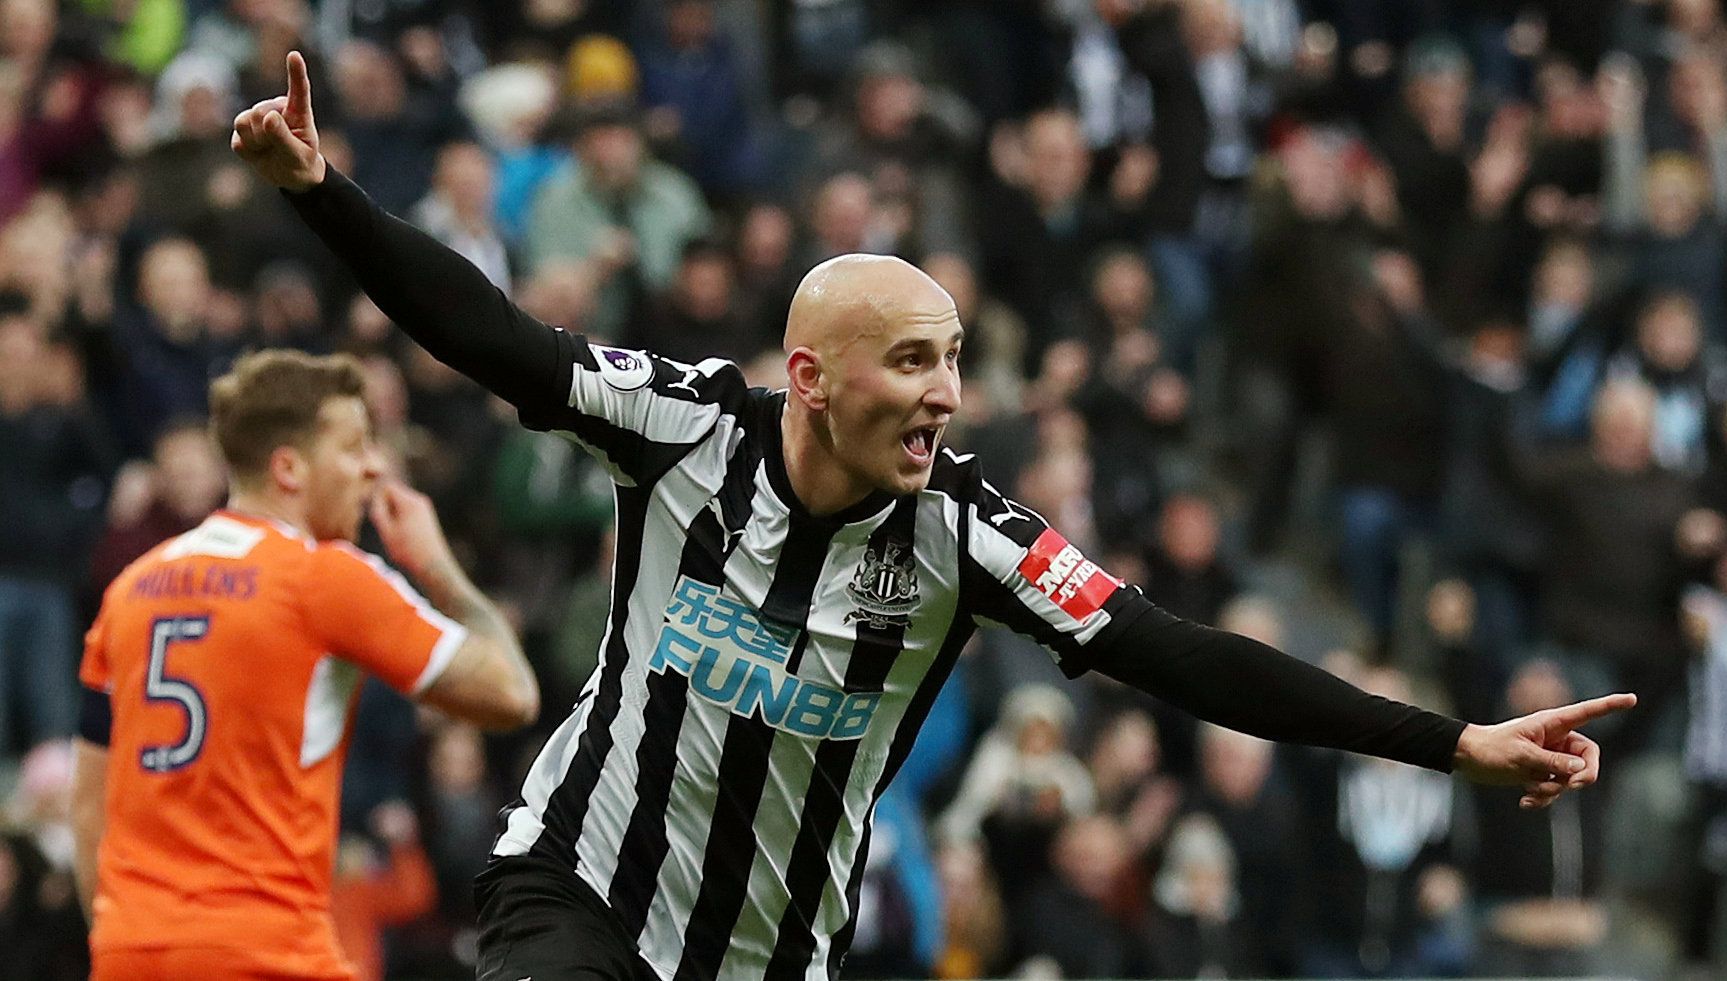 Soccer Football - FA Cup Third Round - Newcastle United vs Luton Town - St James' Park, Newcastle, Britain - January 6, 2018   Newcastle United's Jonjo Shelvey celebrates scoring their third goal            REUTERS/Scott Heppell